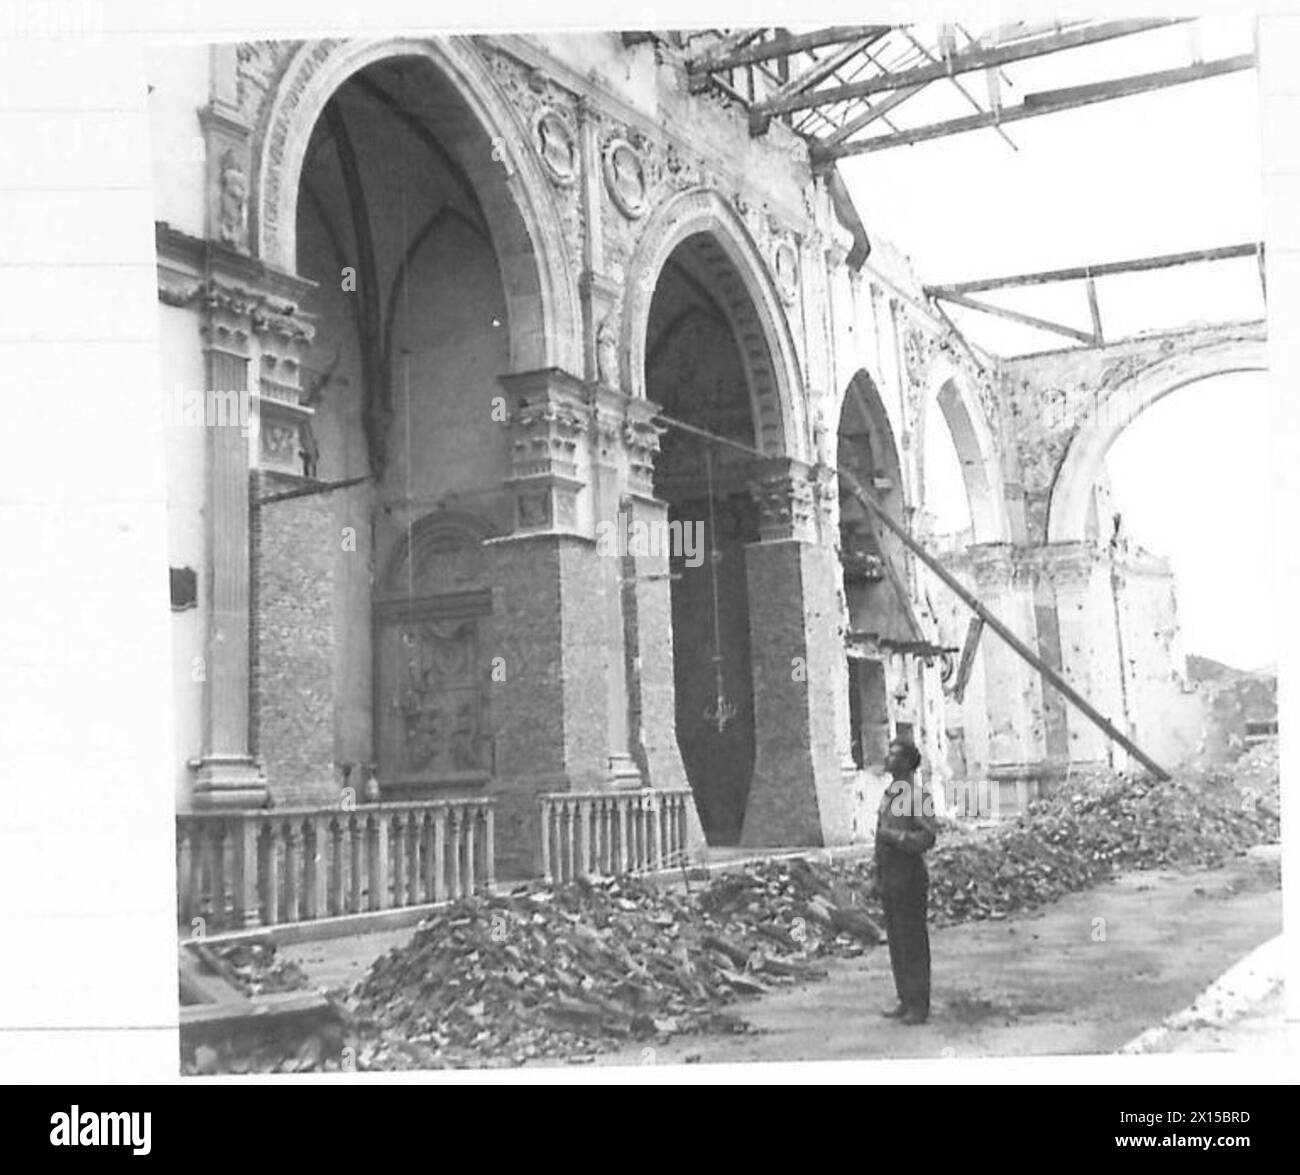 ITALY : EIGHTH ARMY RIMINI FALLS TO THE GREEKS - Rimini Cathedral destroyed dyring the battle for the town, the enemy were using the Cathedral for a number of purposes, including O.P. work from the tower British Army Stock Photo